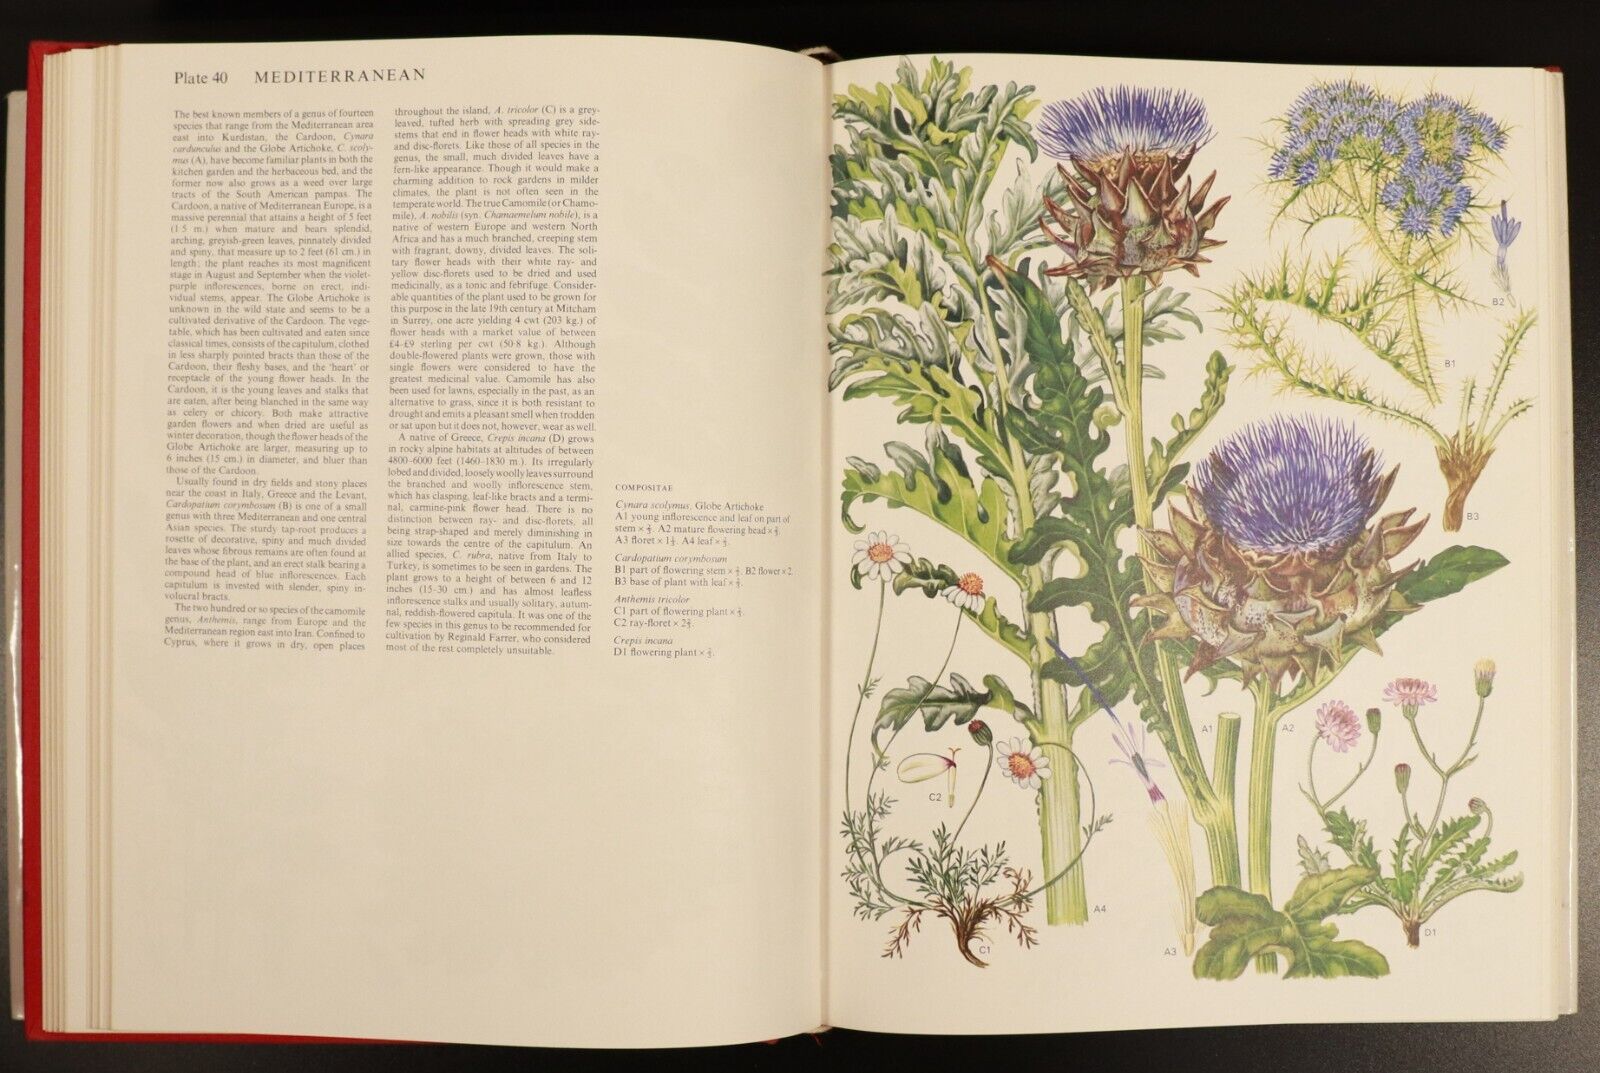 1970 Wild Flowers Of The World Paintings By Barbara Everard Nature Book